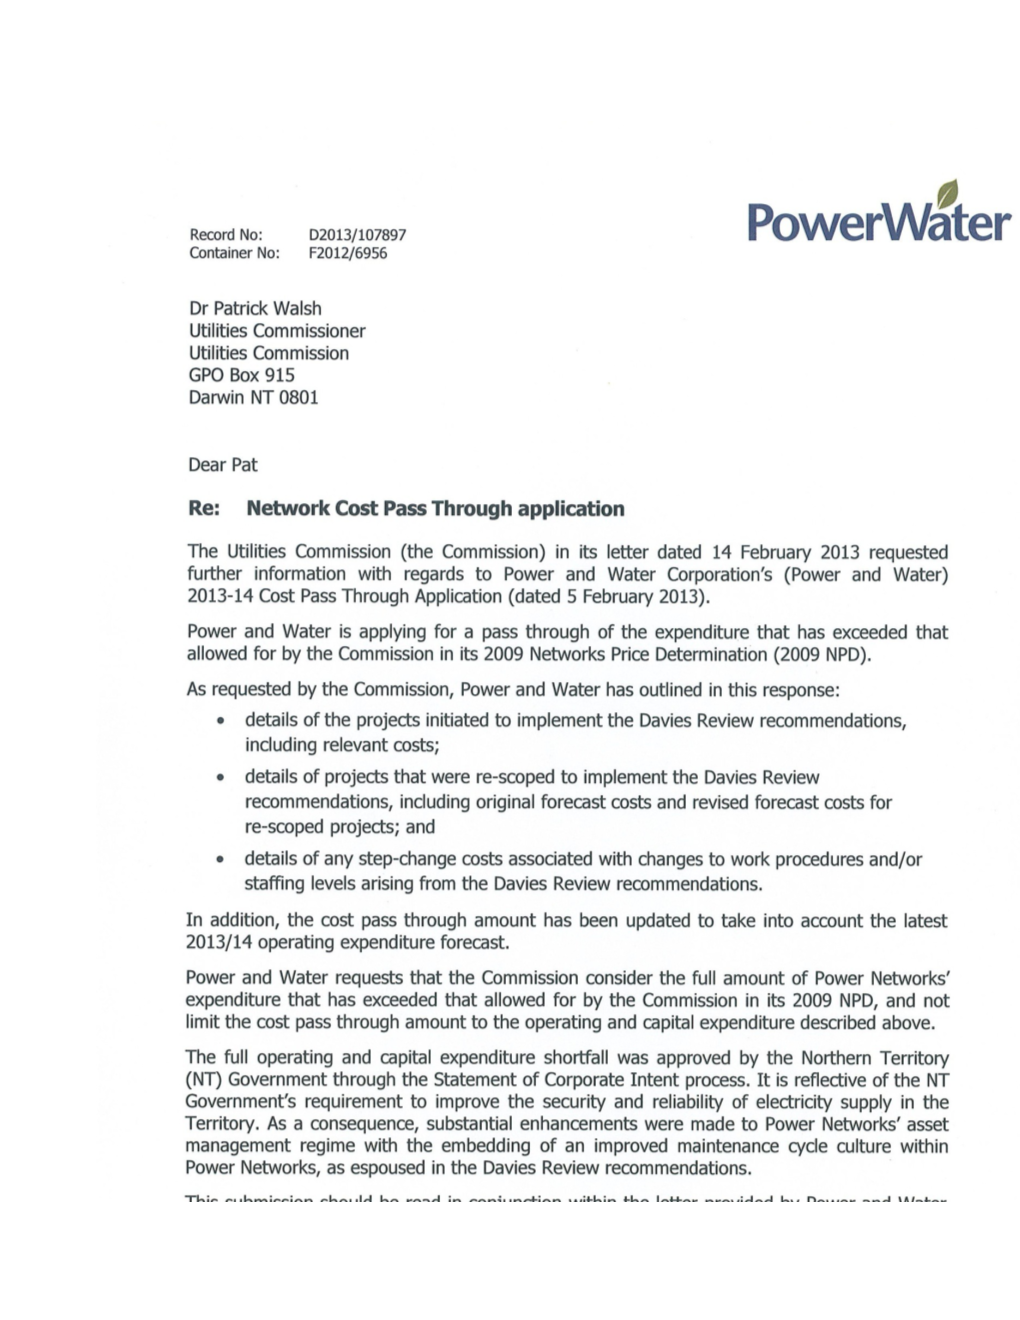 PWC Response to Utilities Commission's Request for Information